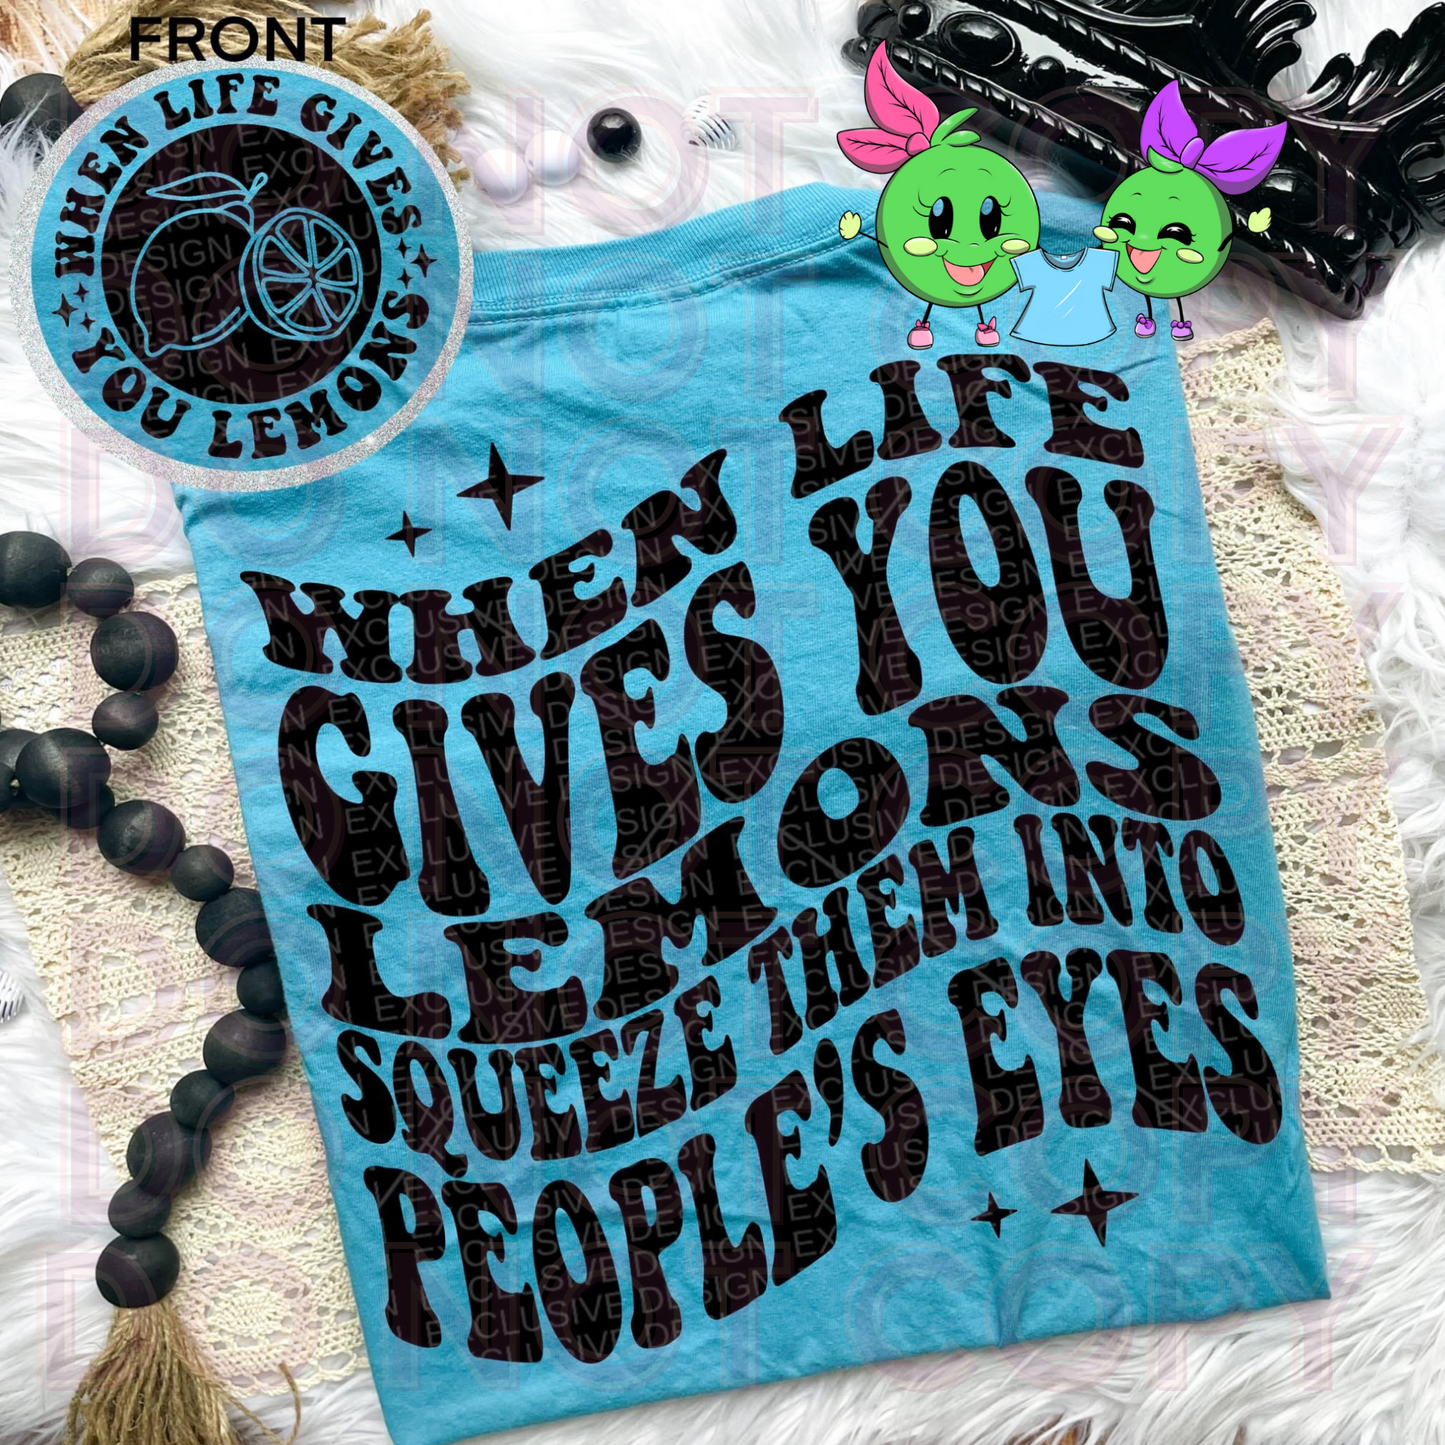 When Life gives You Lemons Squeeze them into People's Eyes Comfort Colors Tee